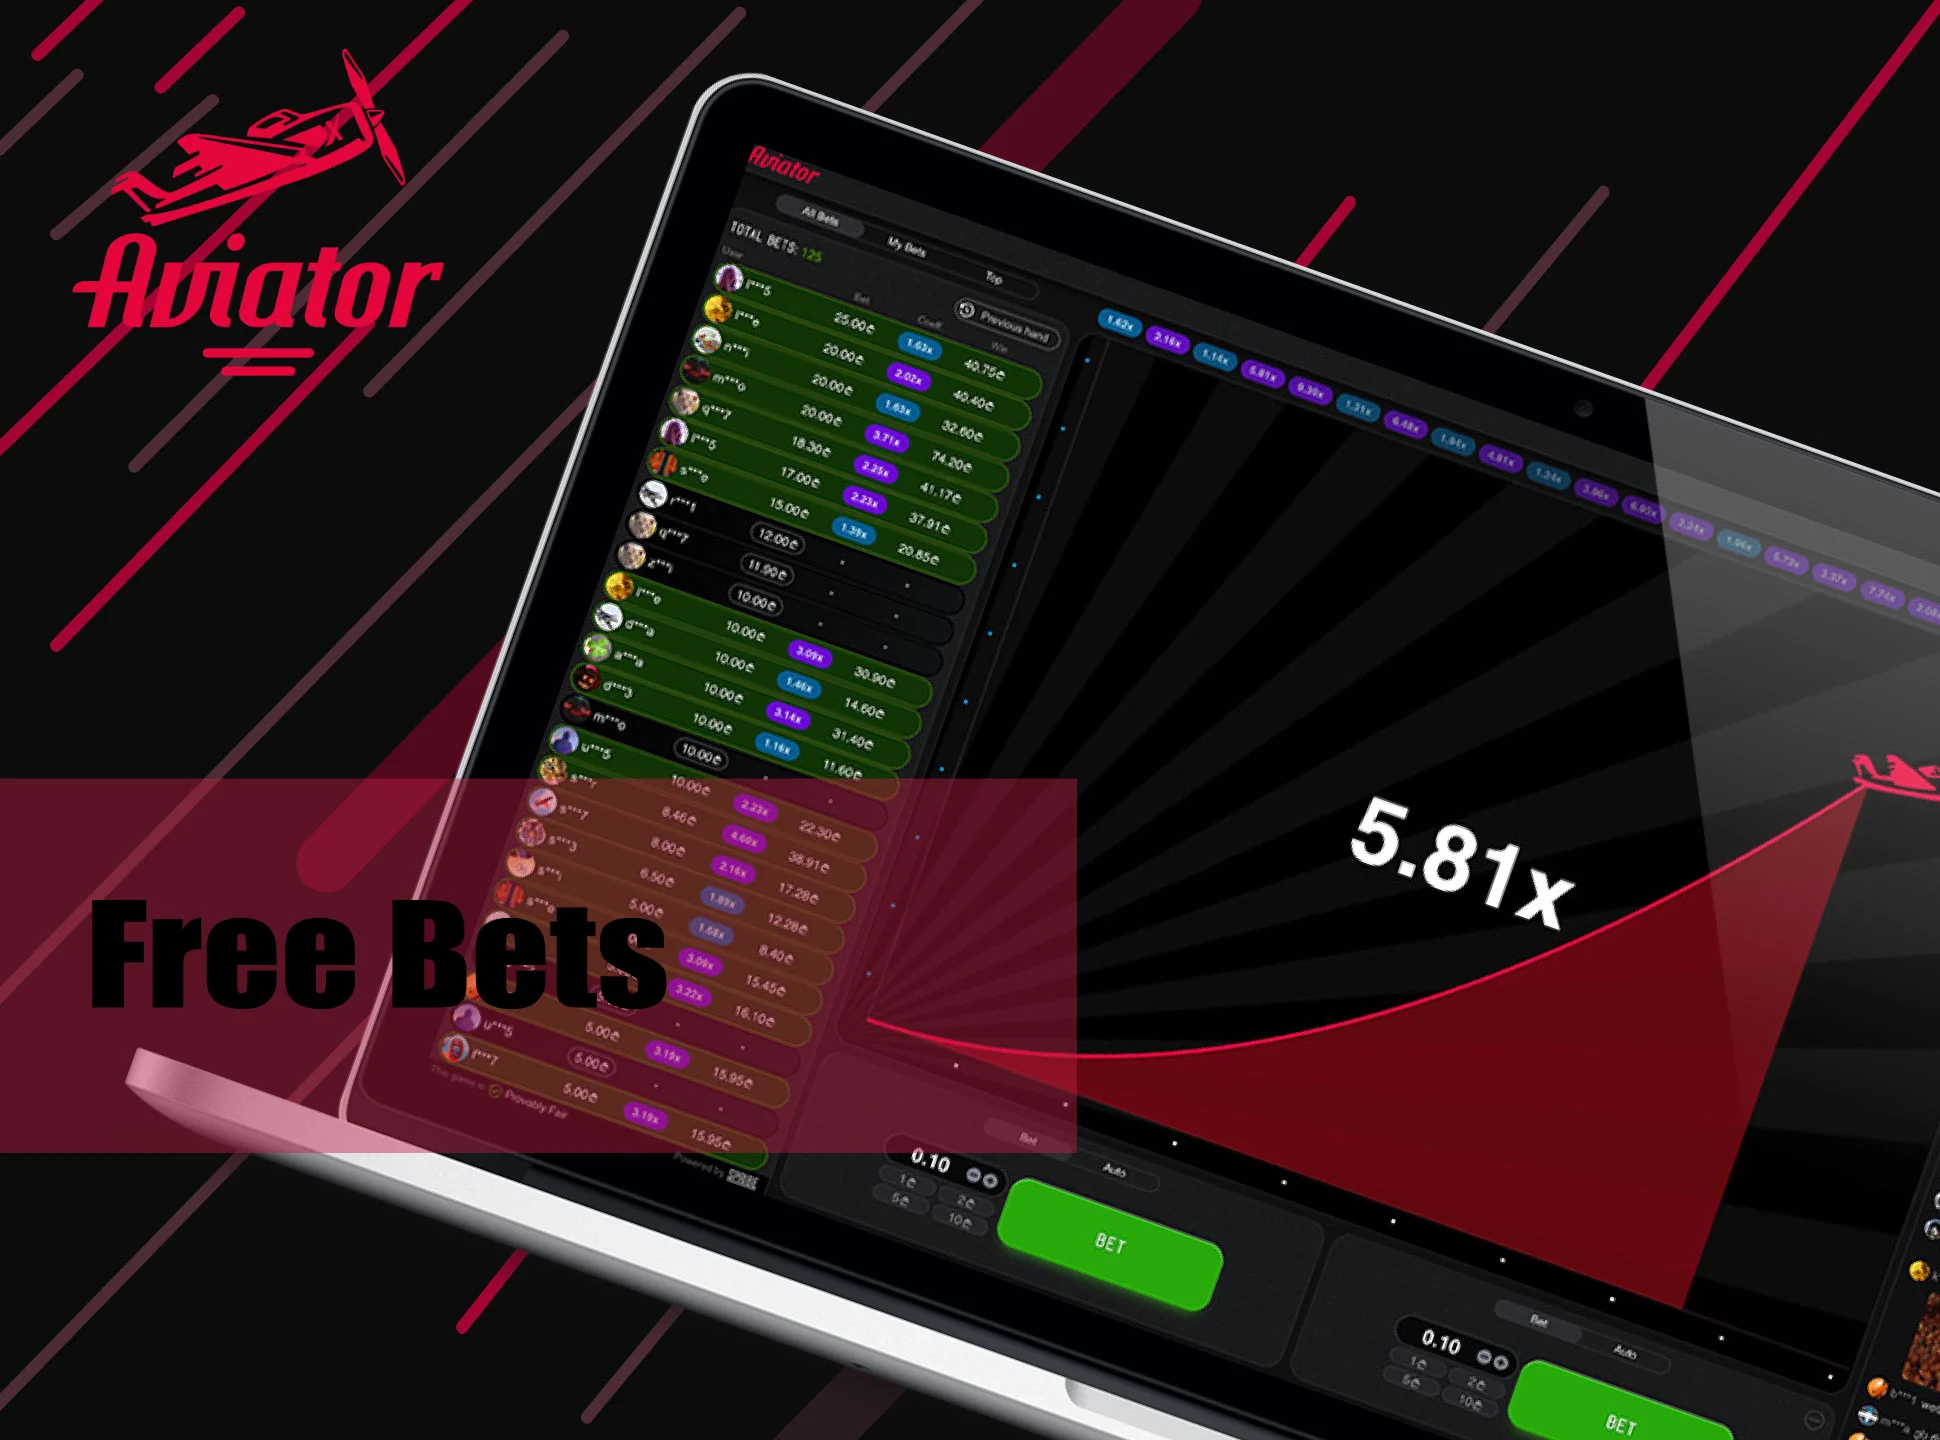 From time to time you can get free bets on the Aviator game.